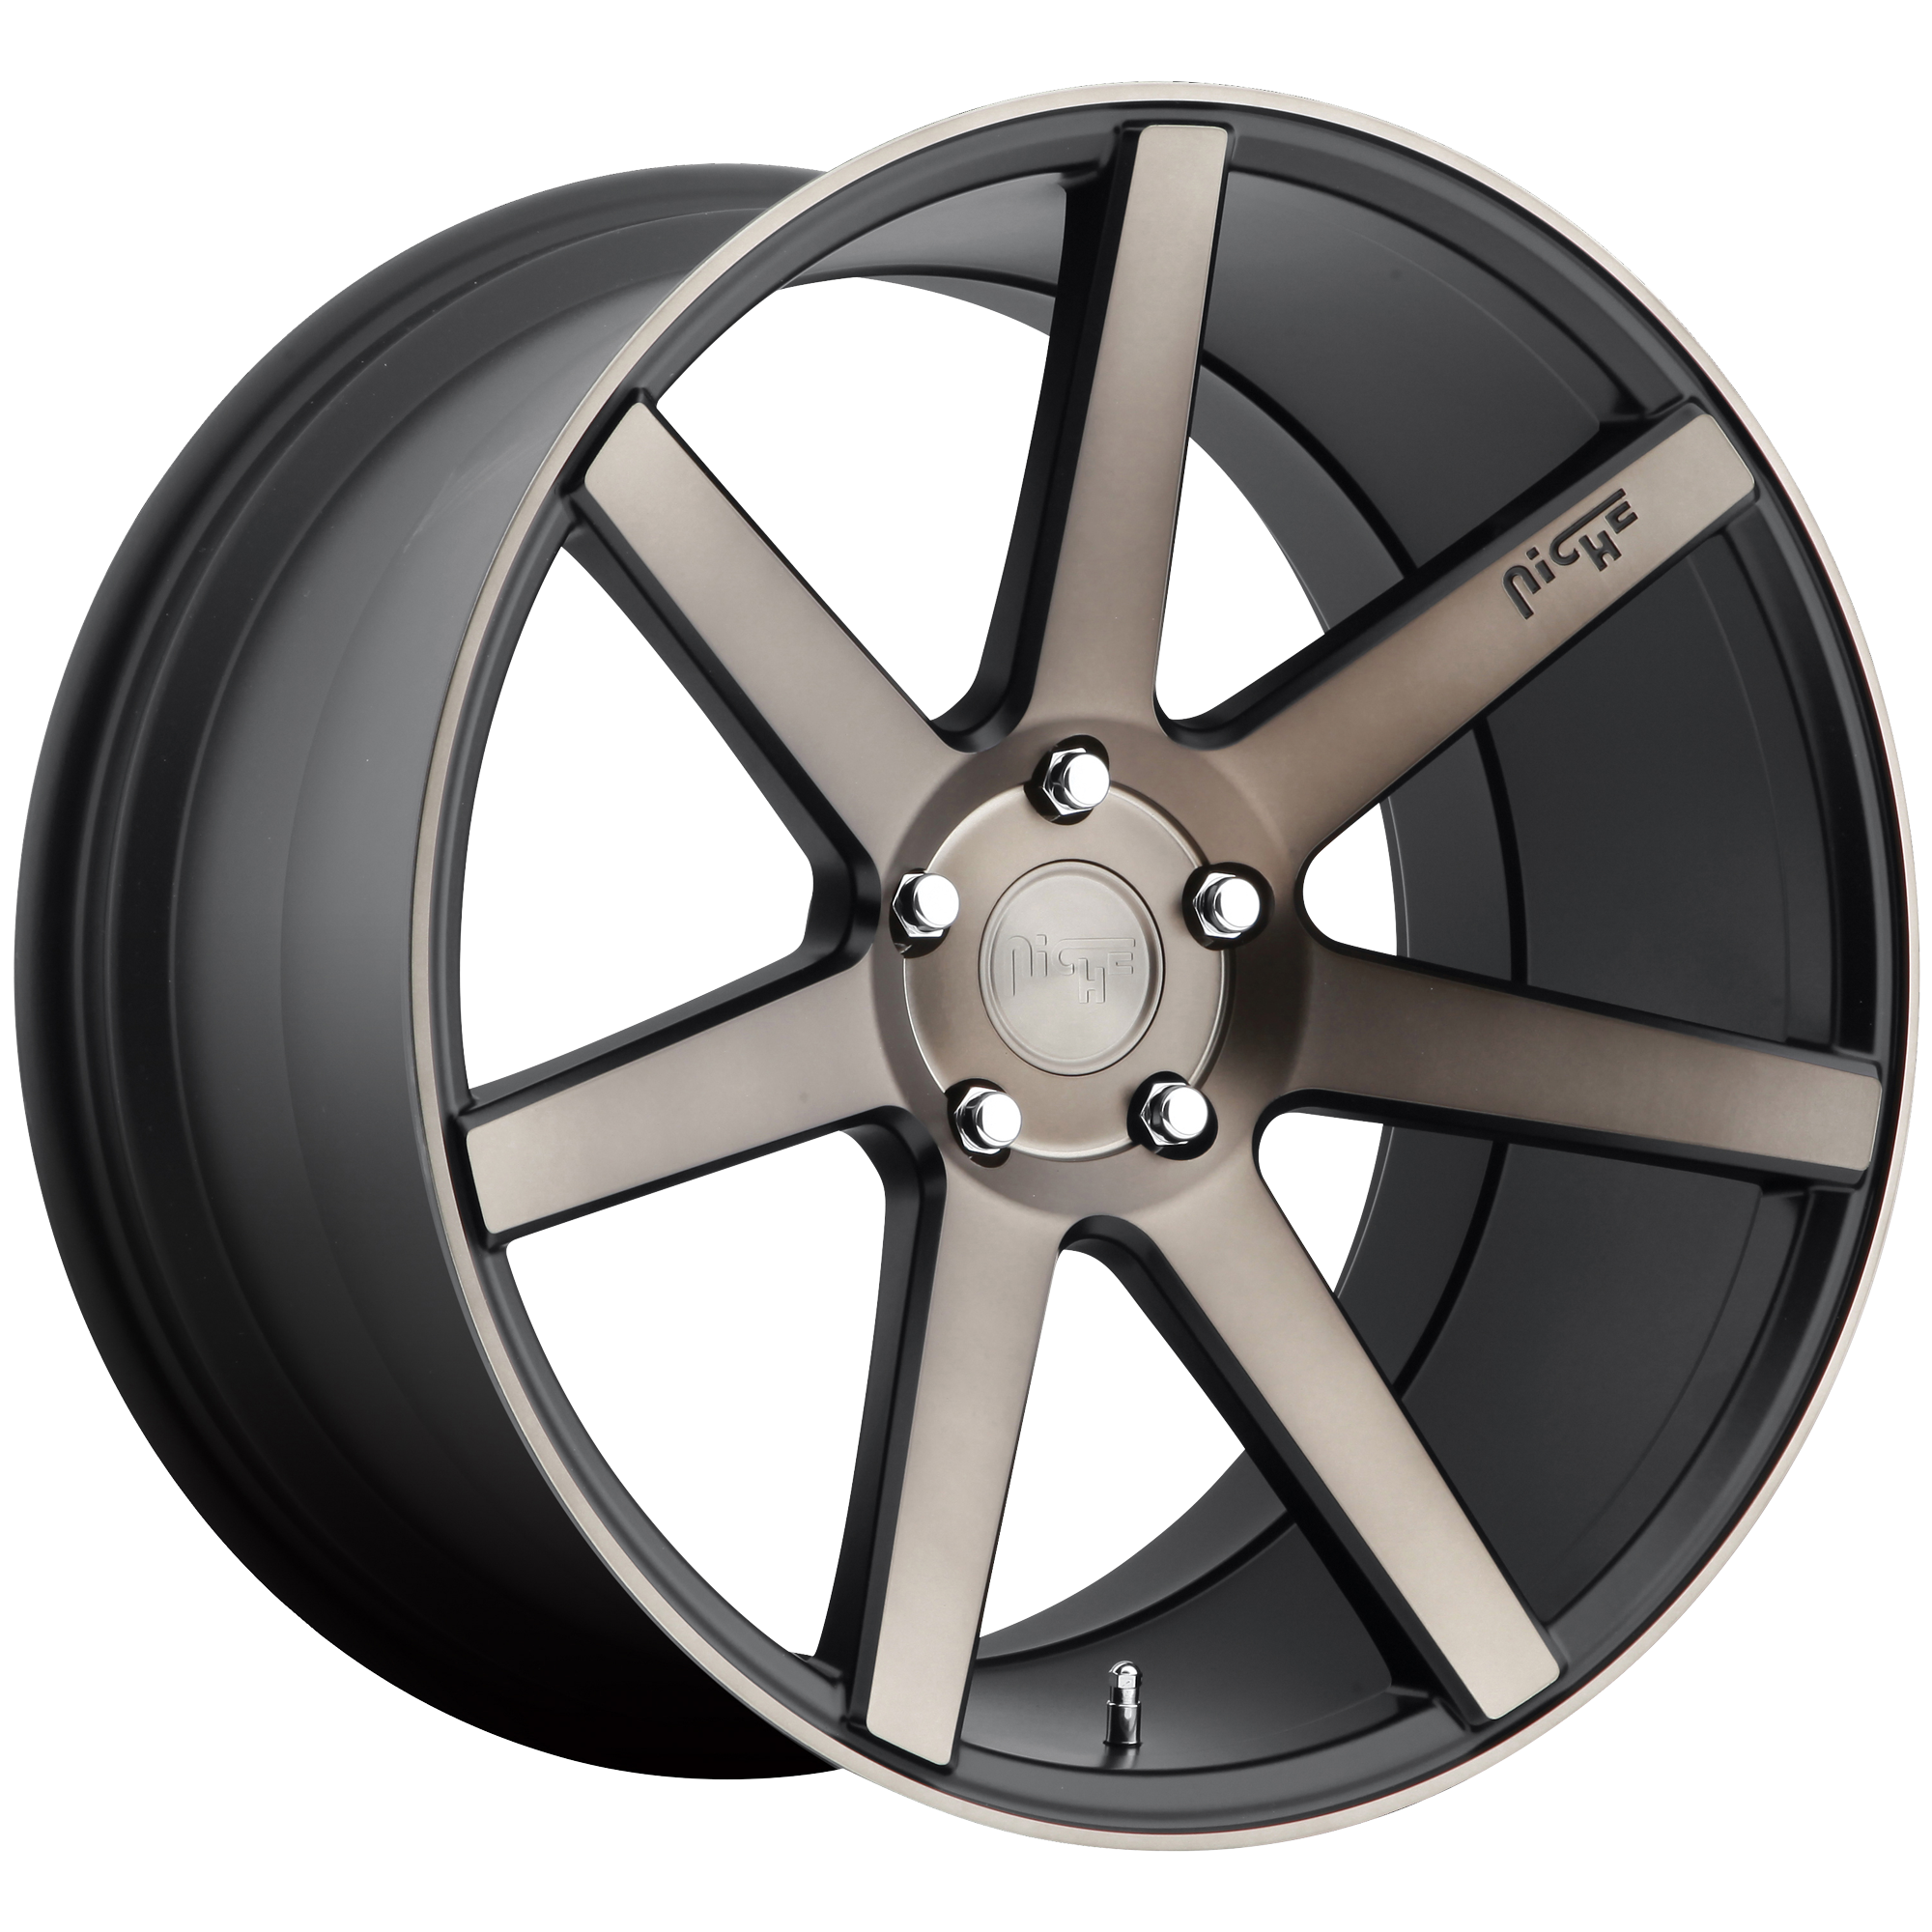 VERONA 18x8 5x114.30 MATTE BLACK MACHINED (40 mm) - Tires and Engine Performance